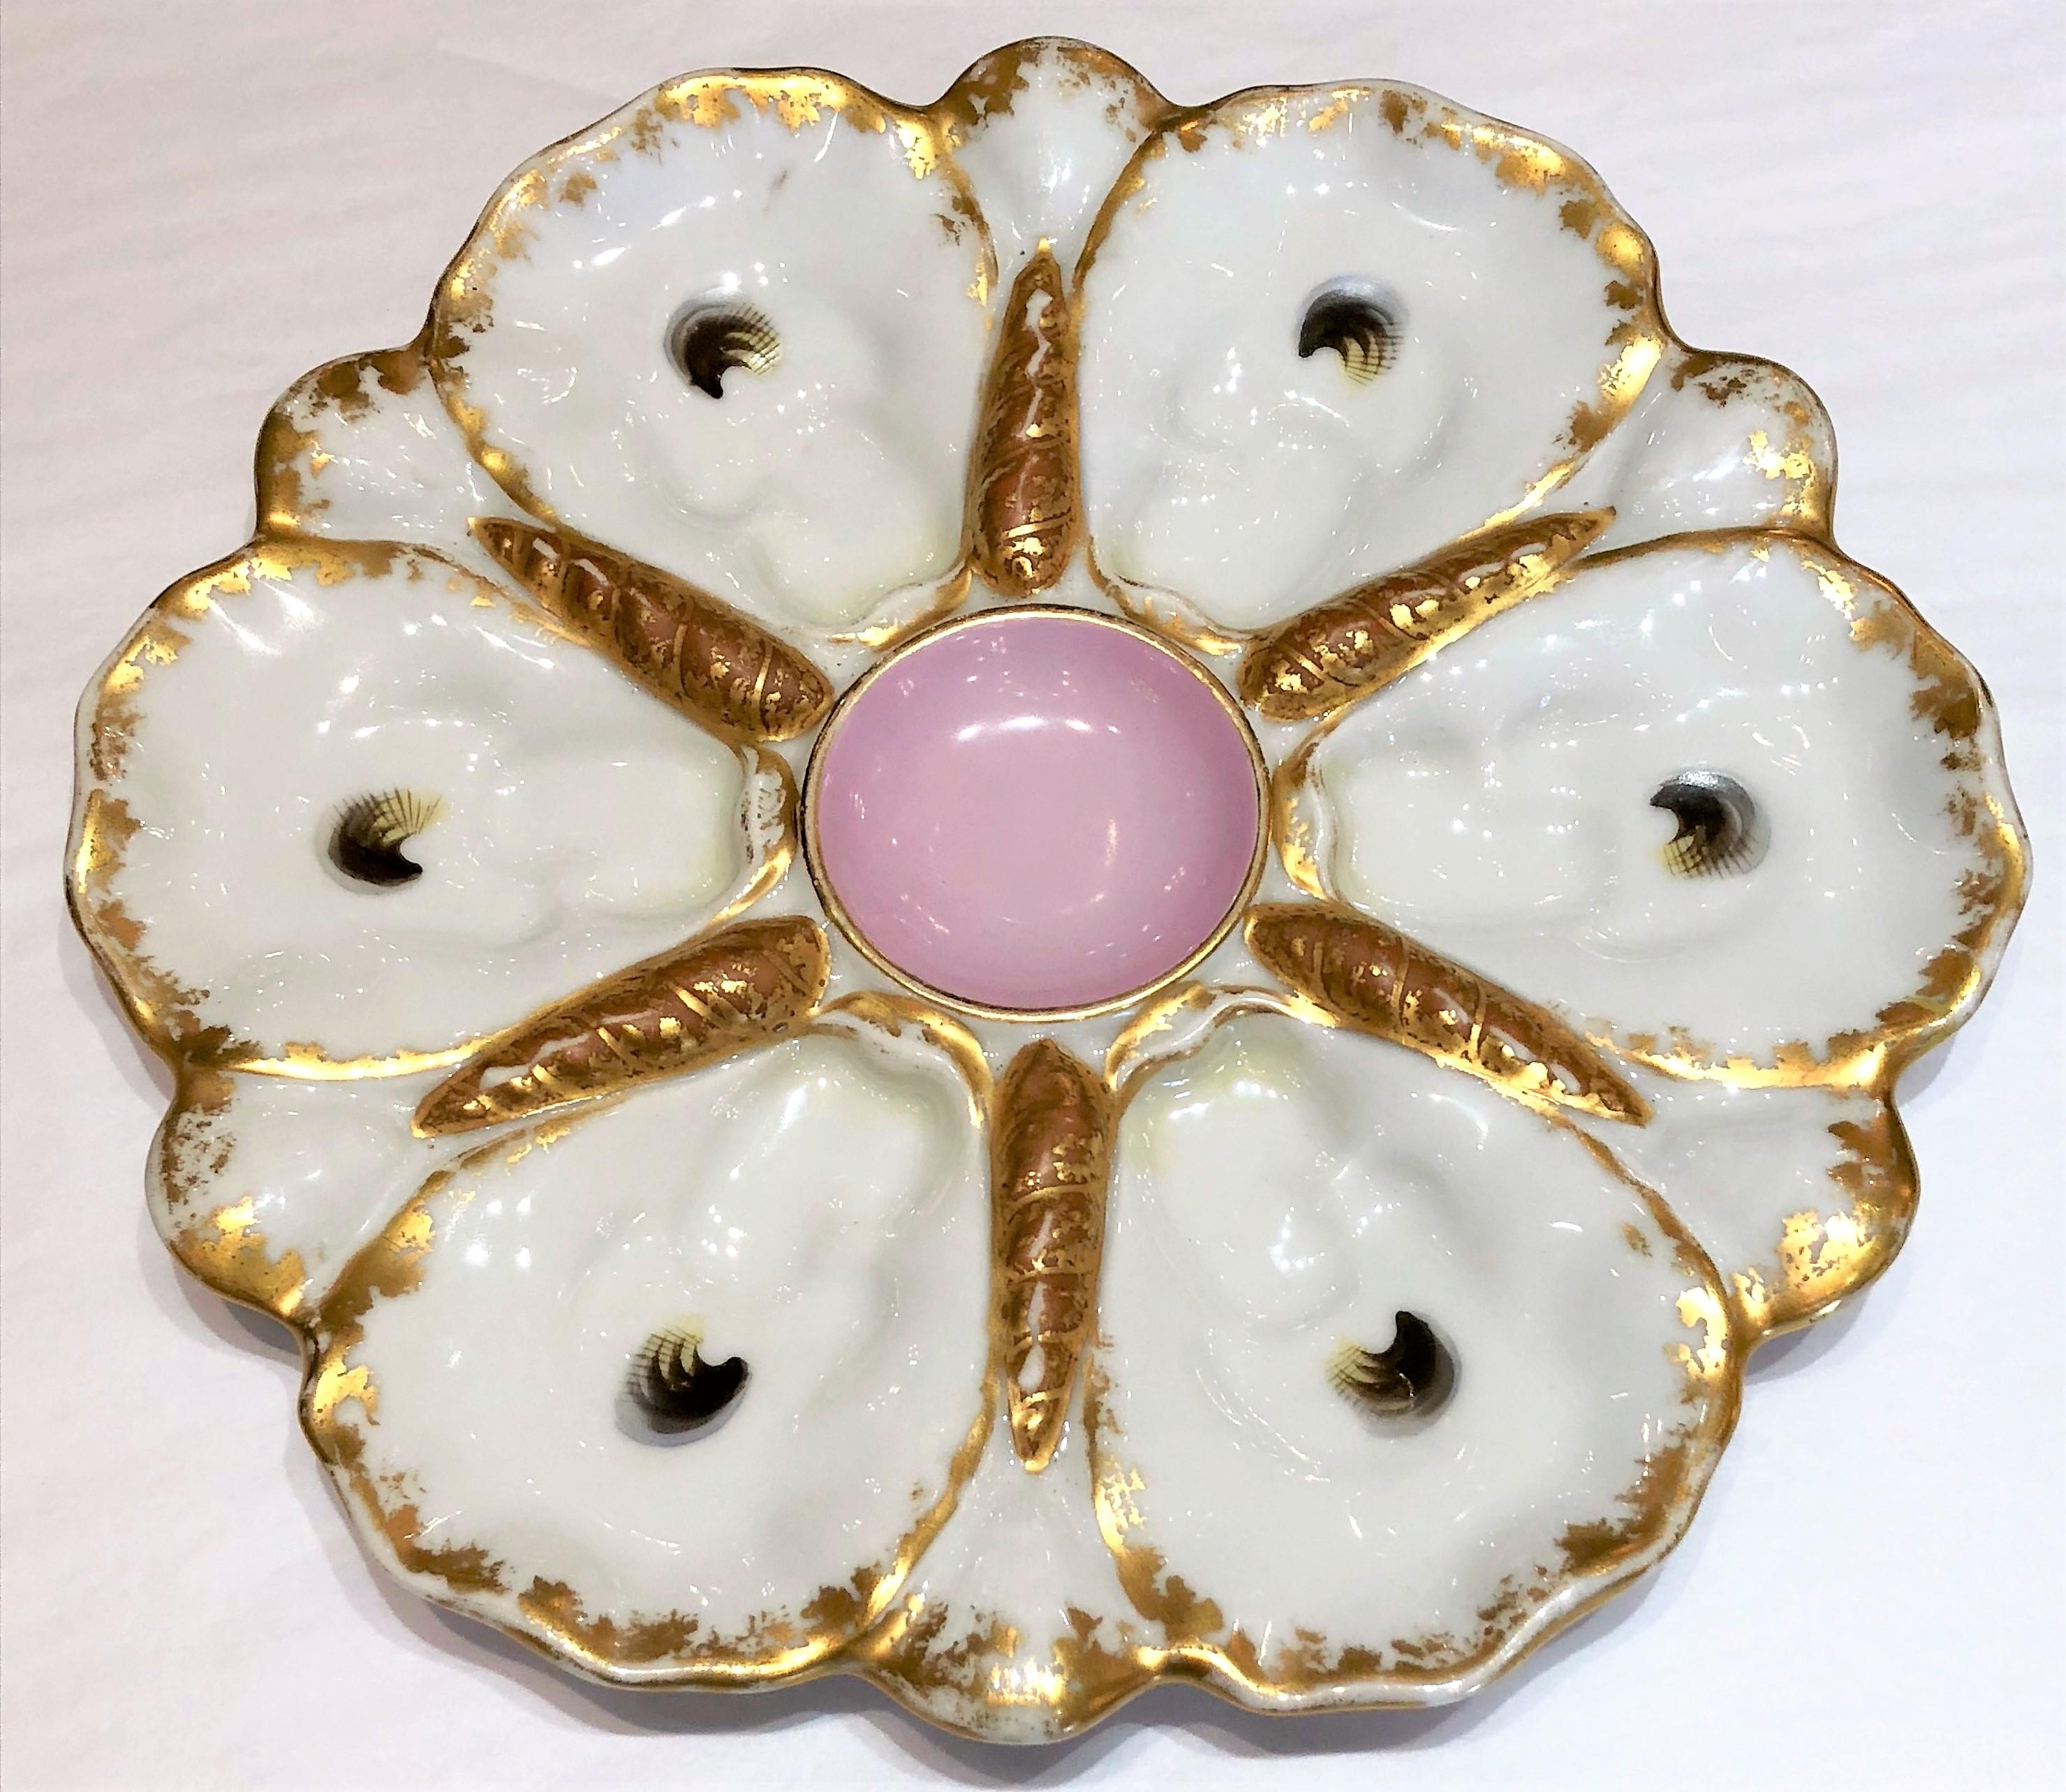 Antique continental hand-painted porcelain oyster plate, circa 1890.